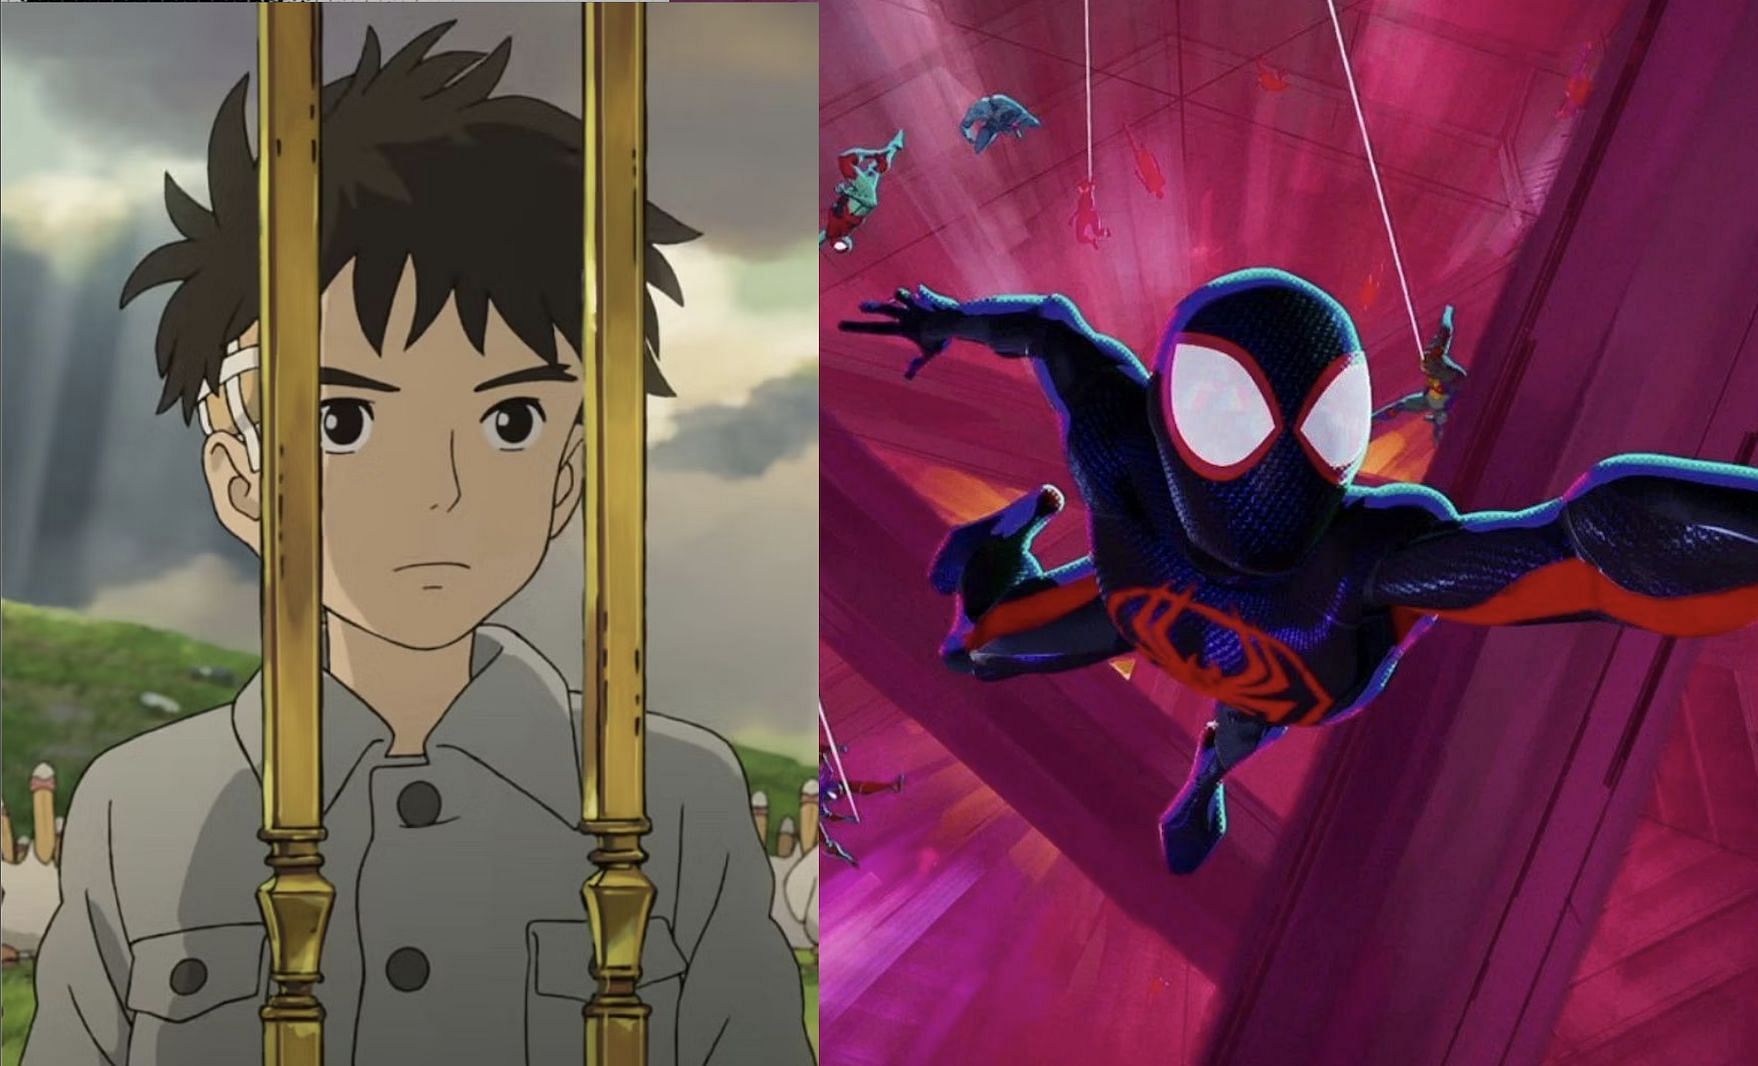 A still from both the nominated films. (Image via GKIDS films and Sony Picture Entertainment respectively from left to right)